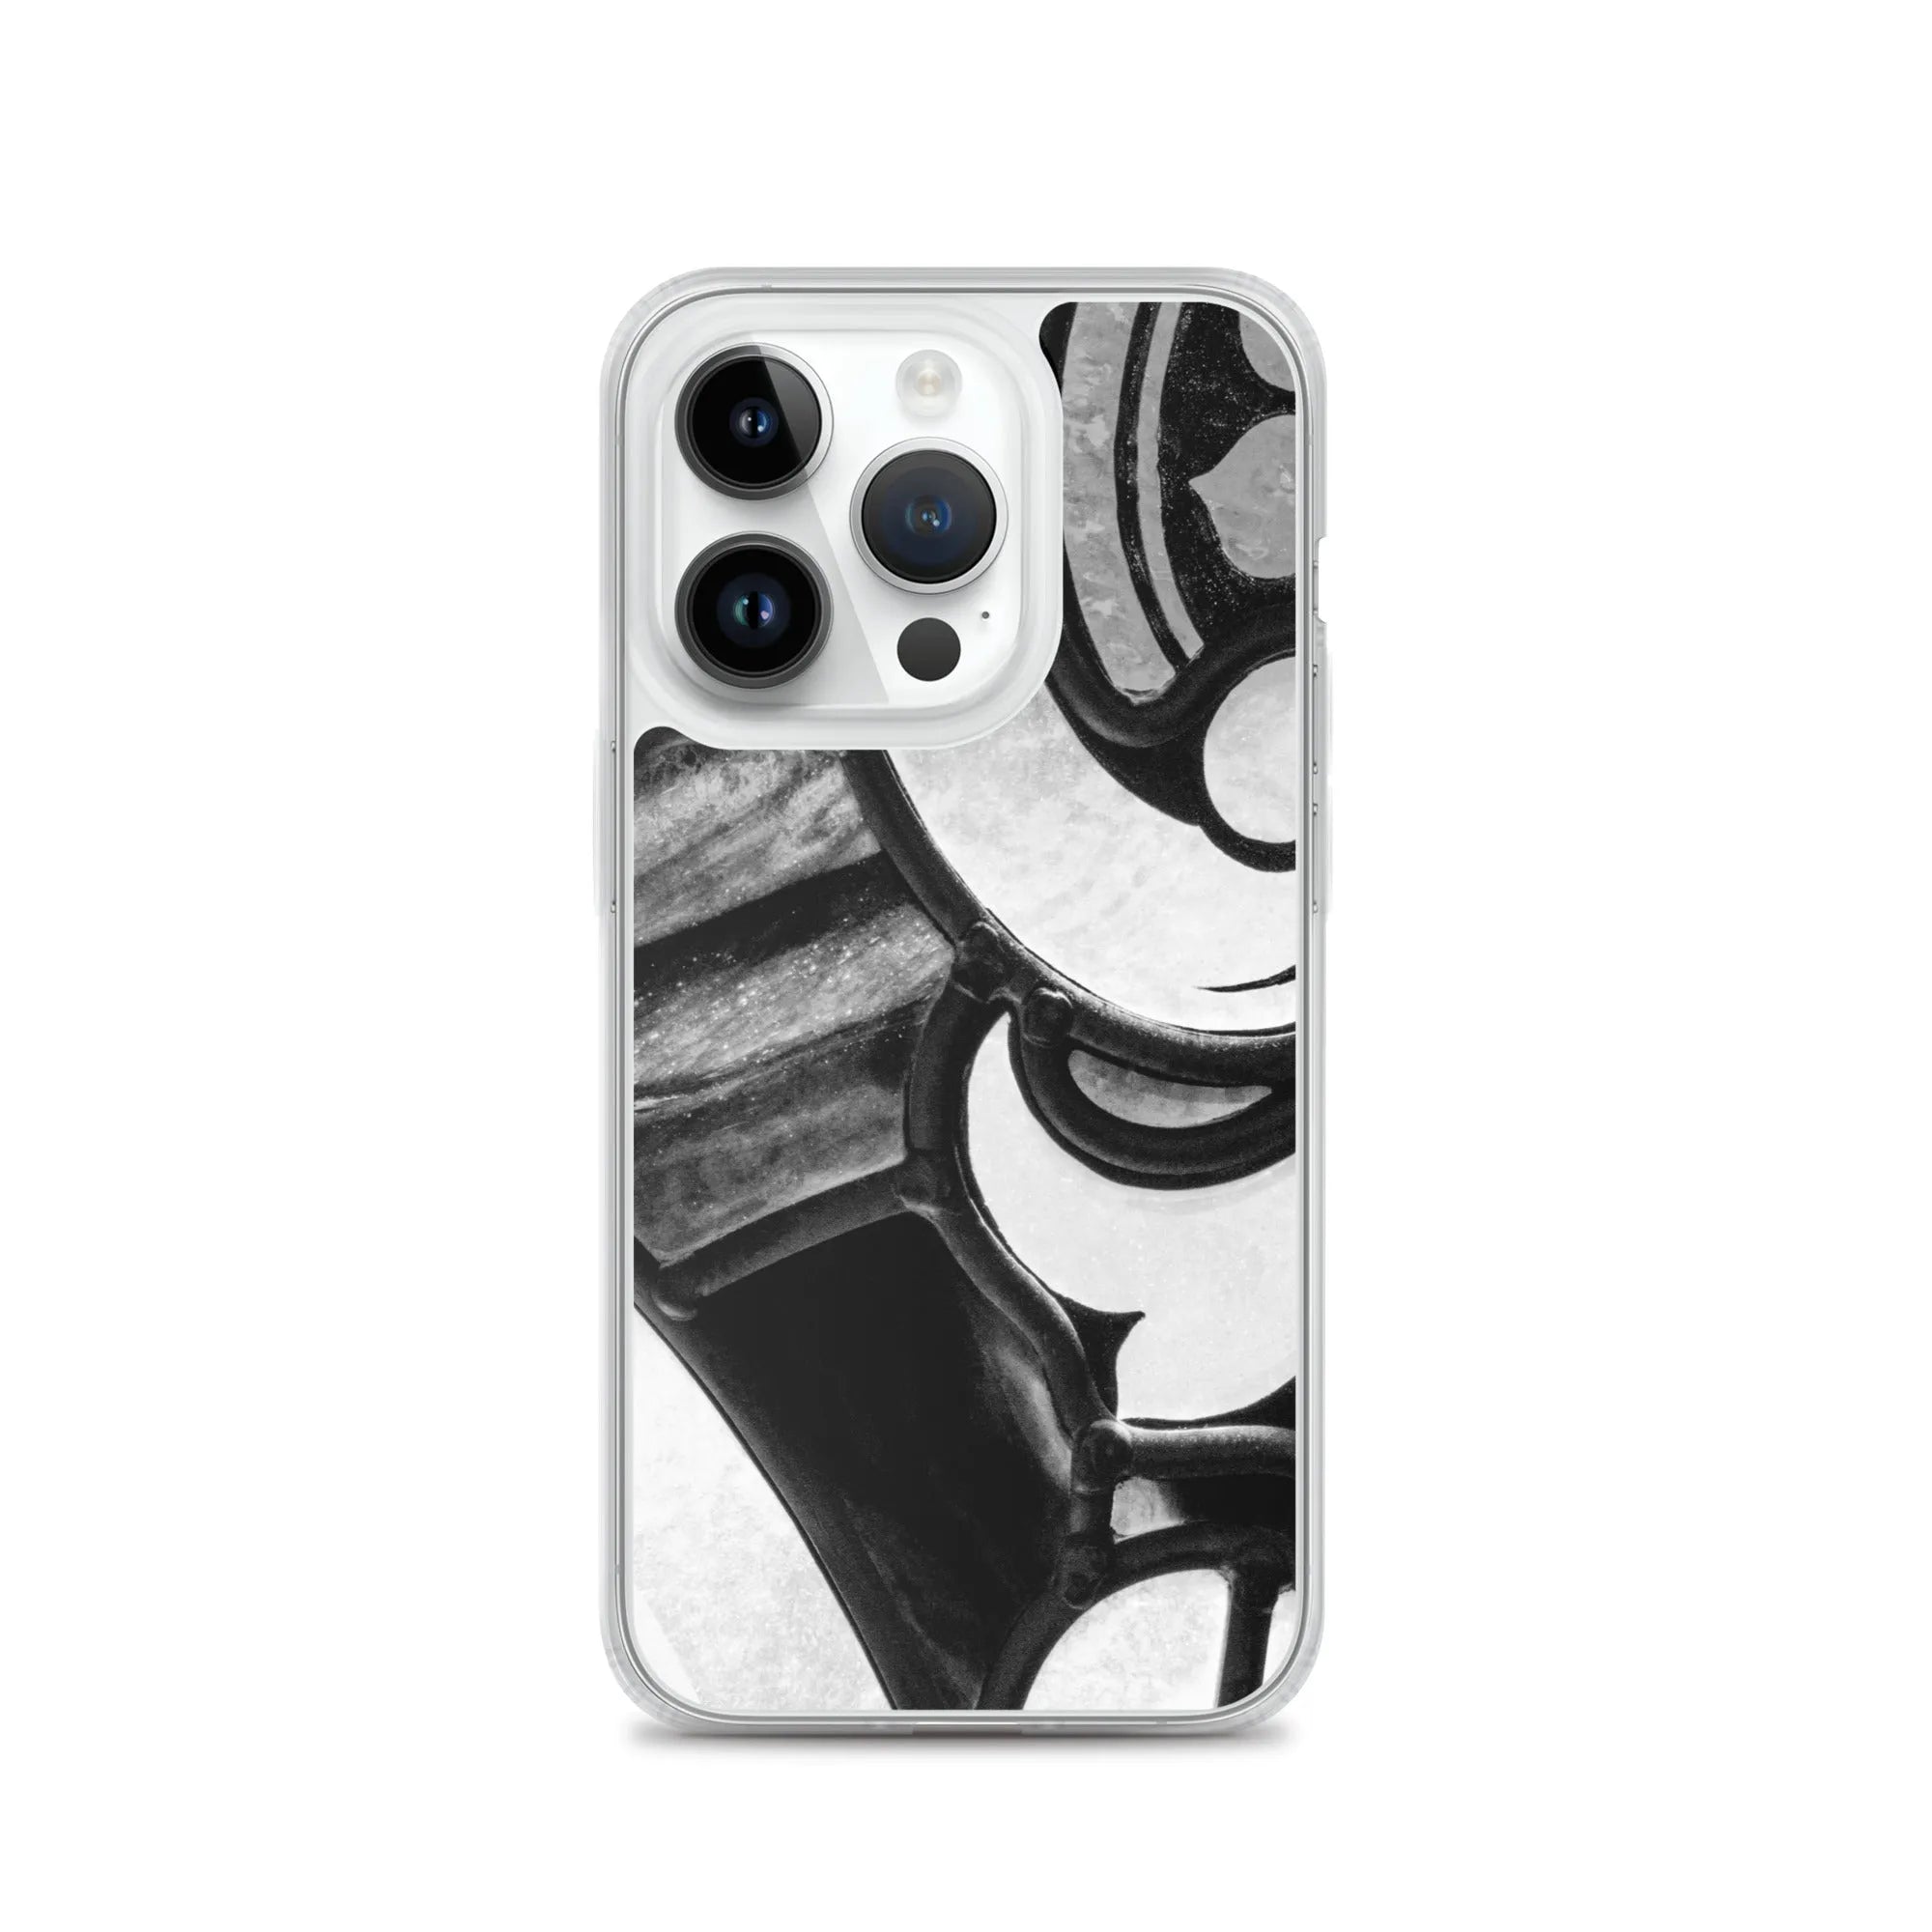 Stay Glassy - Designer Travels Art Iphone Case - Black And White - Iphone 14 Pro - Mobile Phone Cases - Aesthetic Art